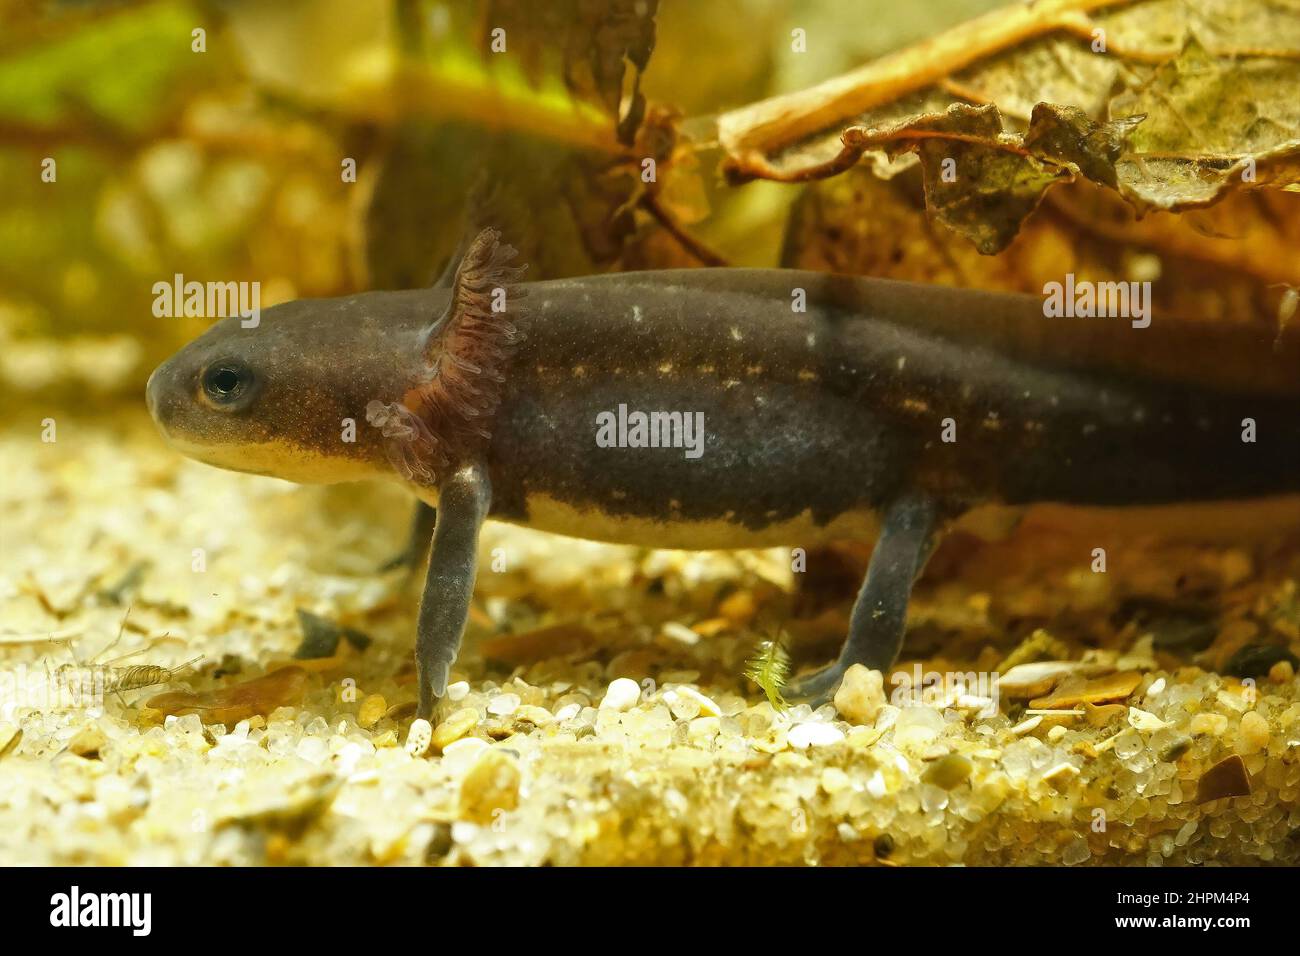 Closeup on a larvae of the Chinese firebellied newt, Cynops orientalis Stock Photo